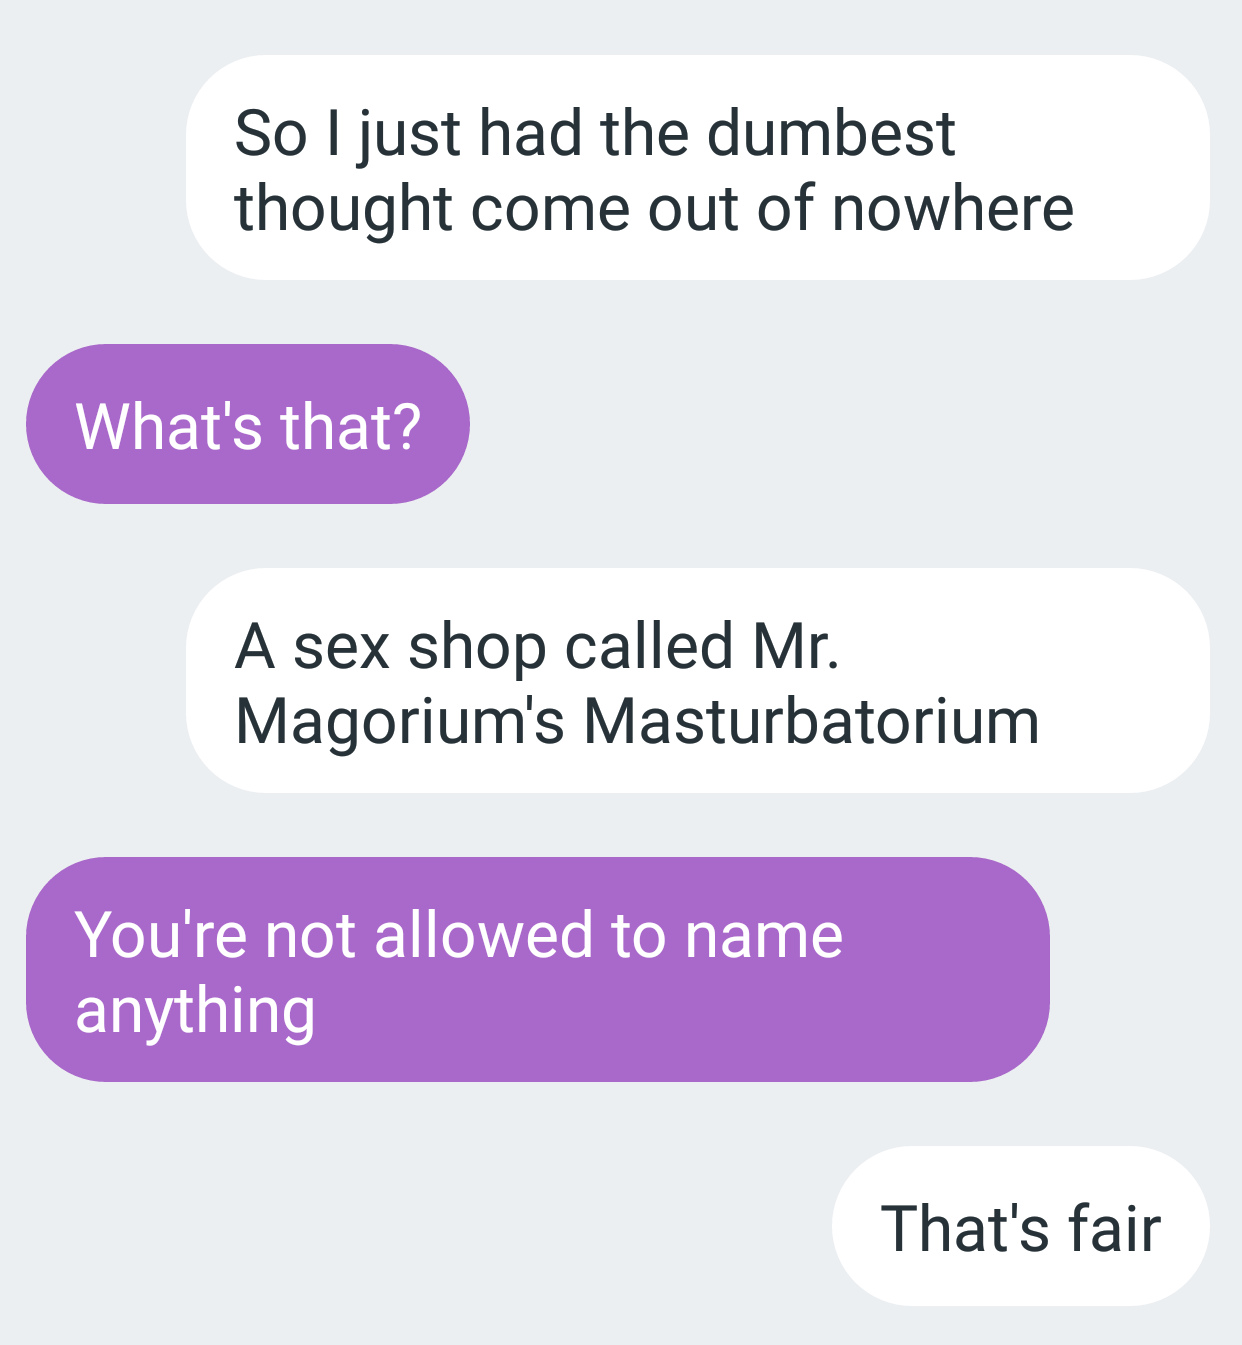 inappropriate posts - So I just had the dumbest thought come out of nowhere What's that? A sex shop called Mr. Magorium's Masturbatorium You're not allowed to name anything That's fair